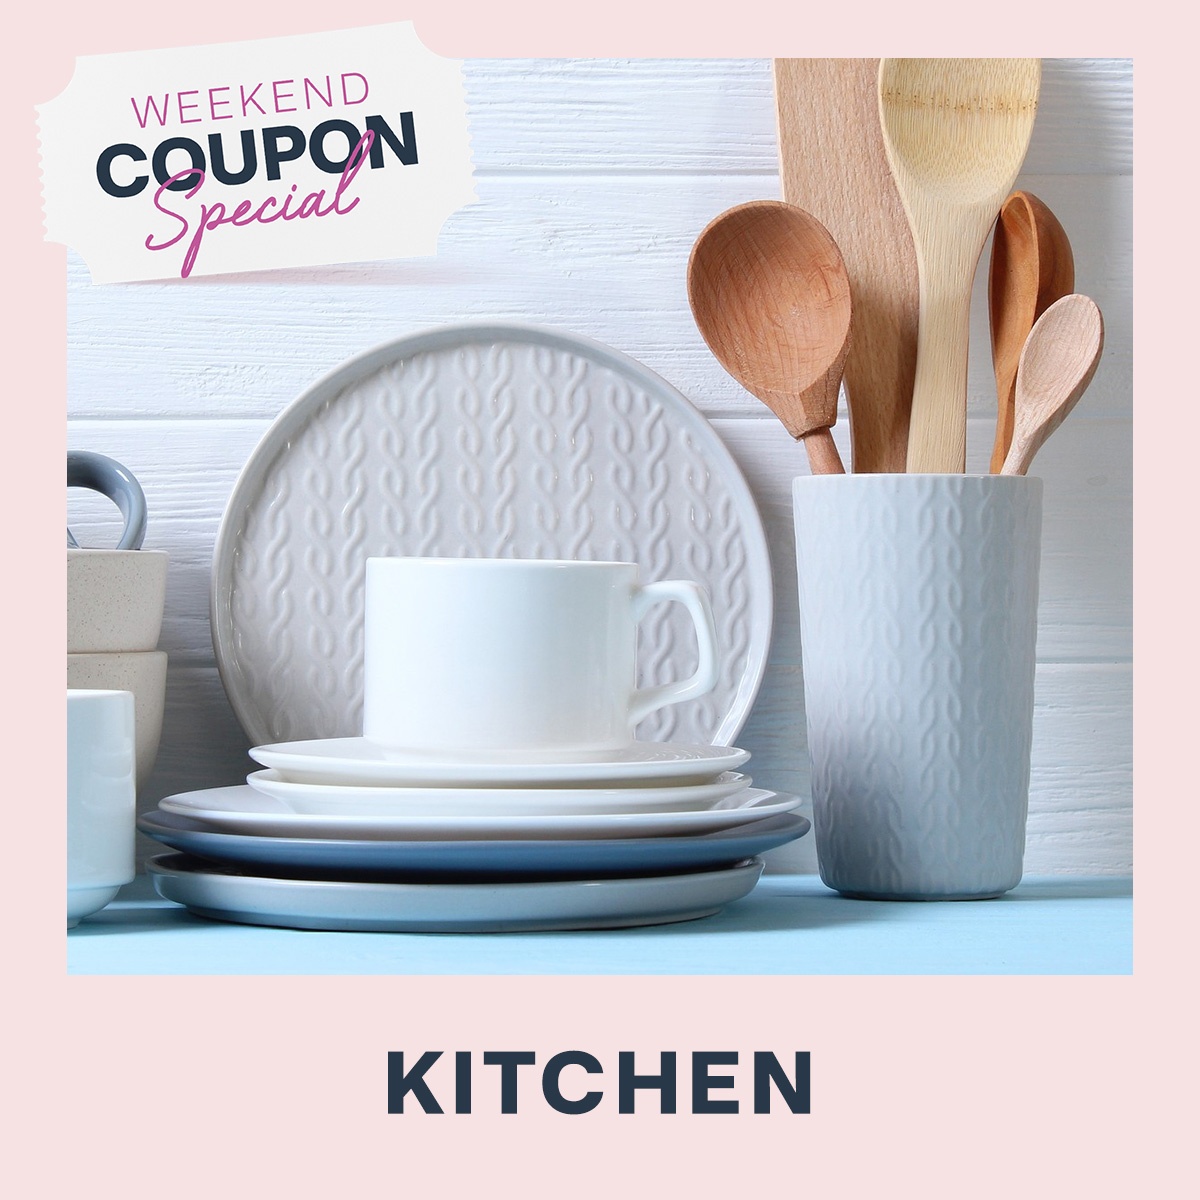 Weekend Kitchen Coupon Special